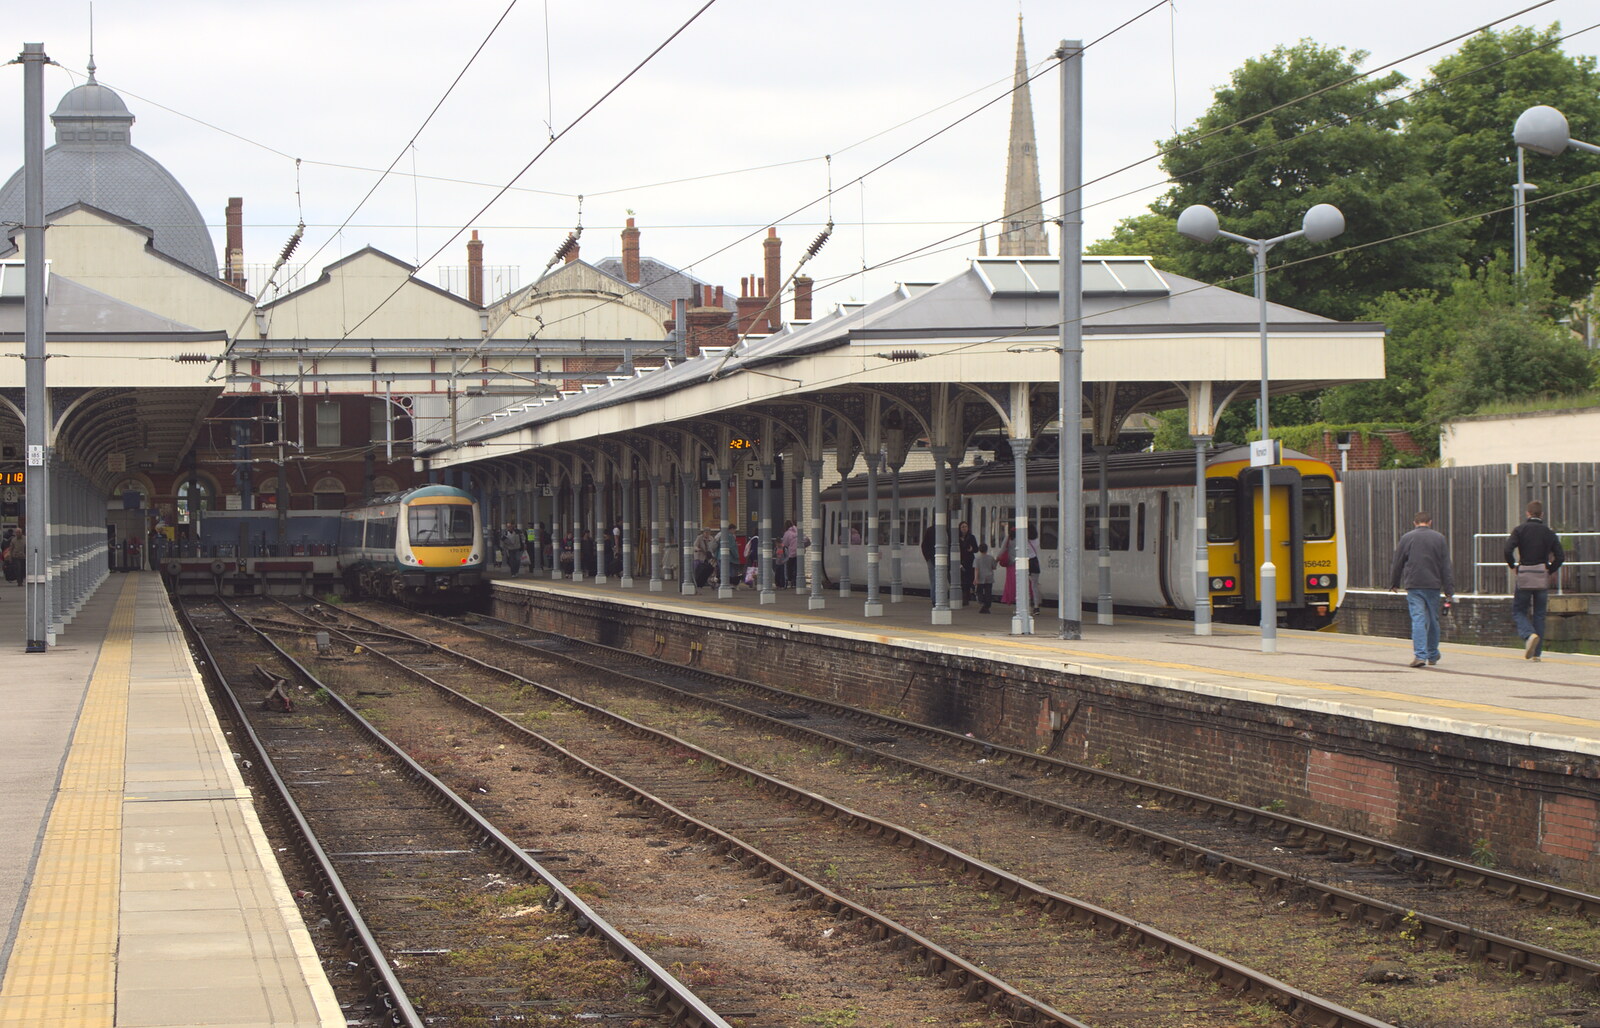 More mundane DMU units wait at Norwich from Tangmere at Norwich Station, Norwich, Norfolk - 25th May 2013